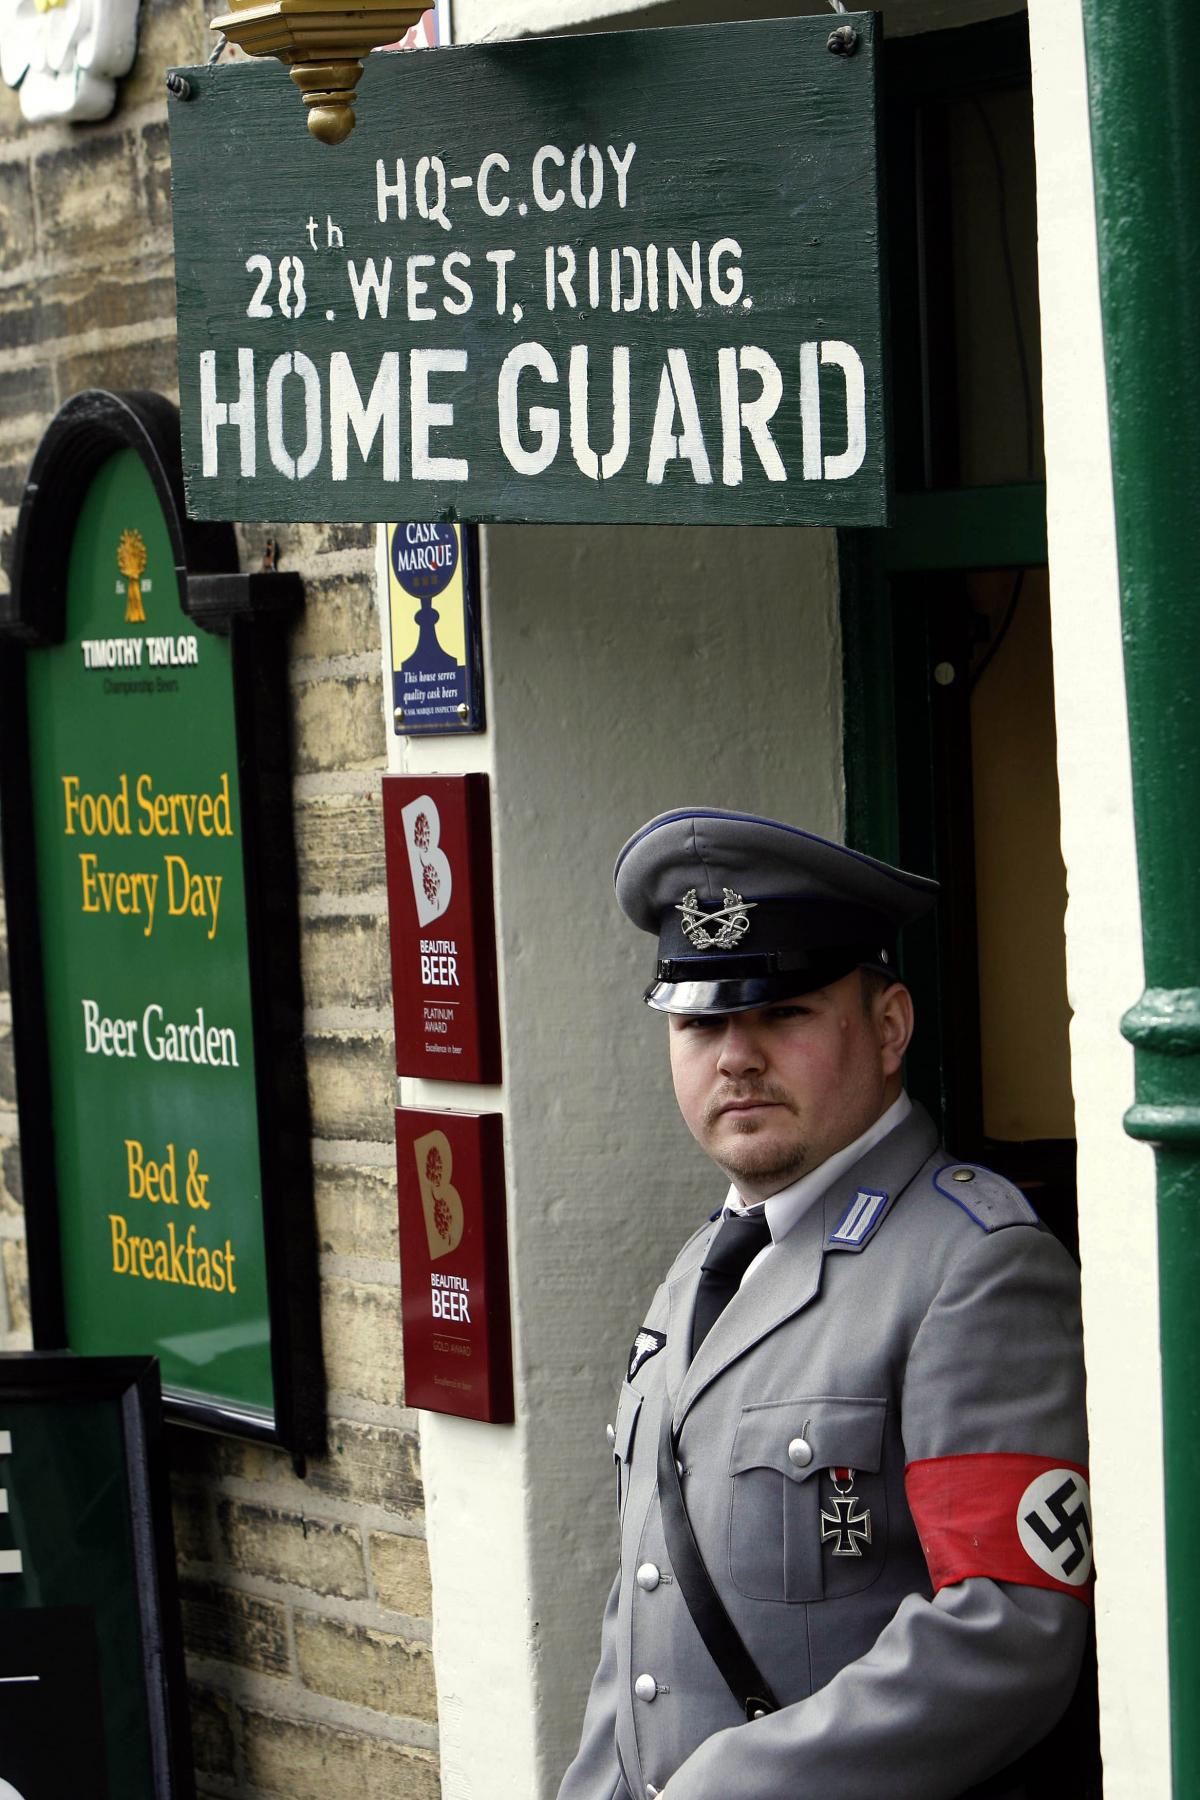 Paddy Gaskin, bar manager of the Fleece Inn, finds himself at the Home Guard headquarters